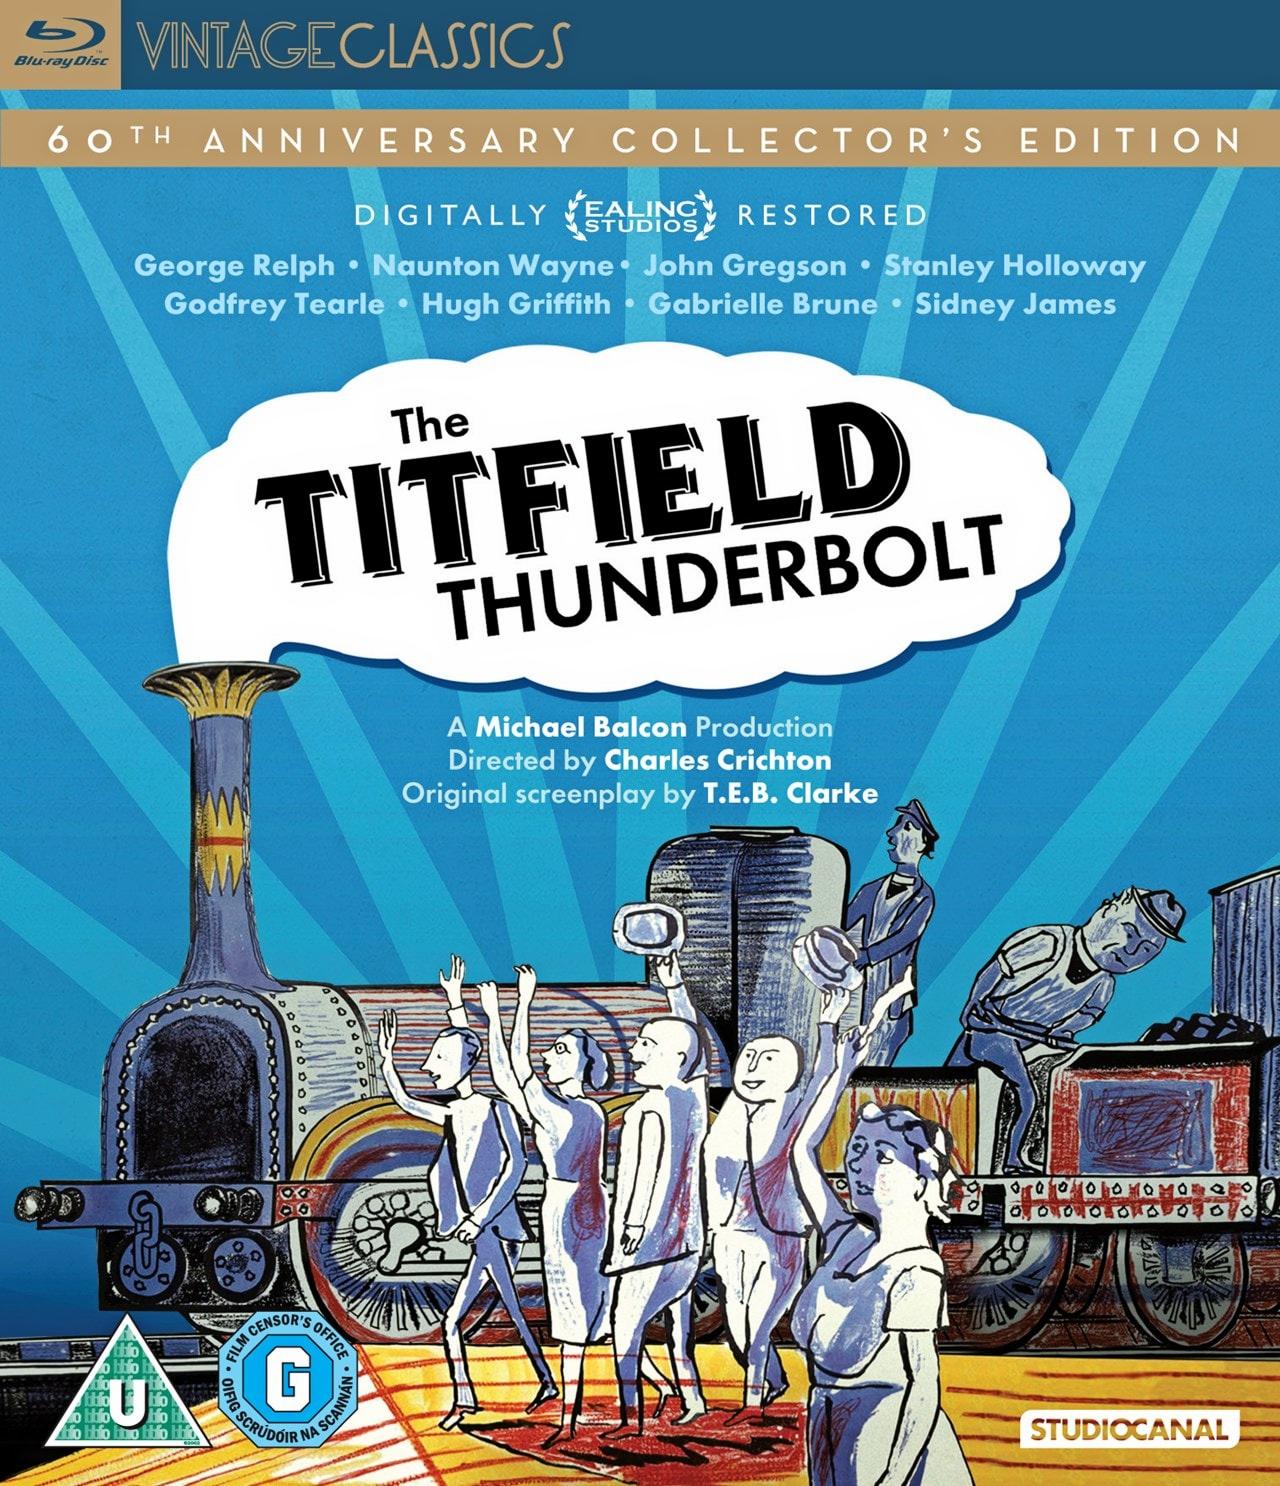 The Titfield Thunderbolt (1953) Blu-ray cover from Studio Canal [2013] (1)